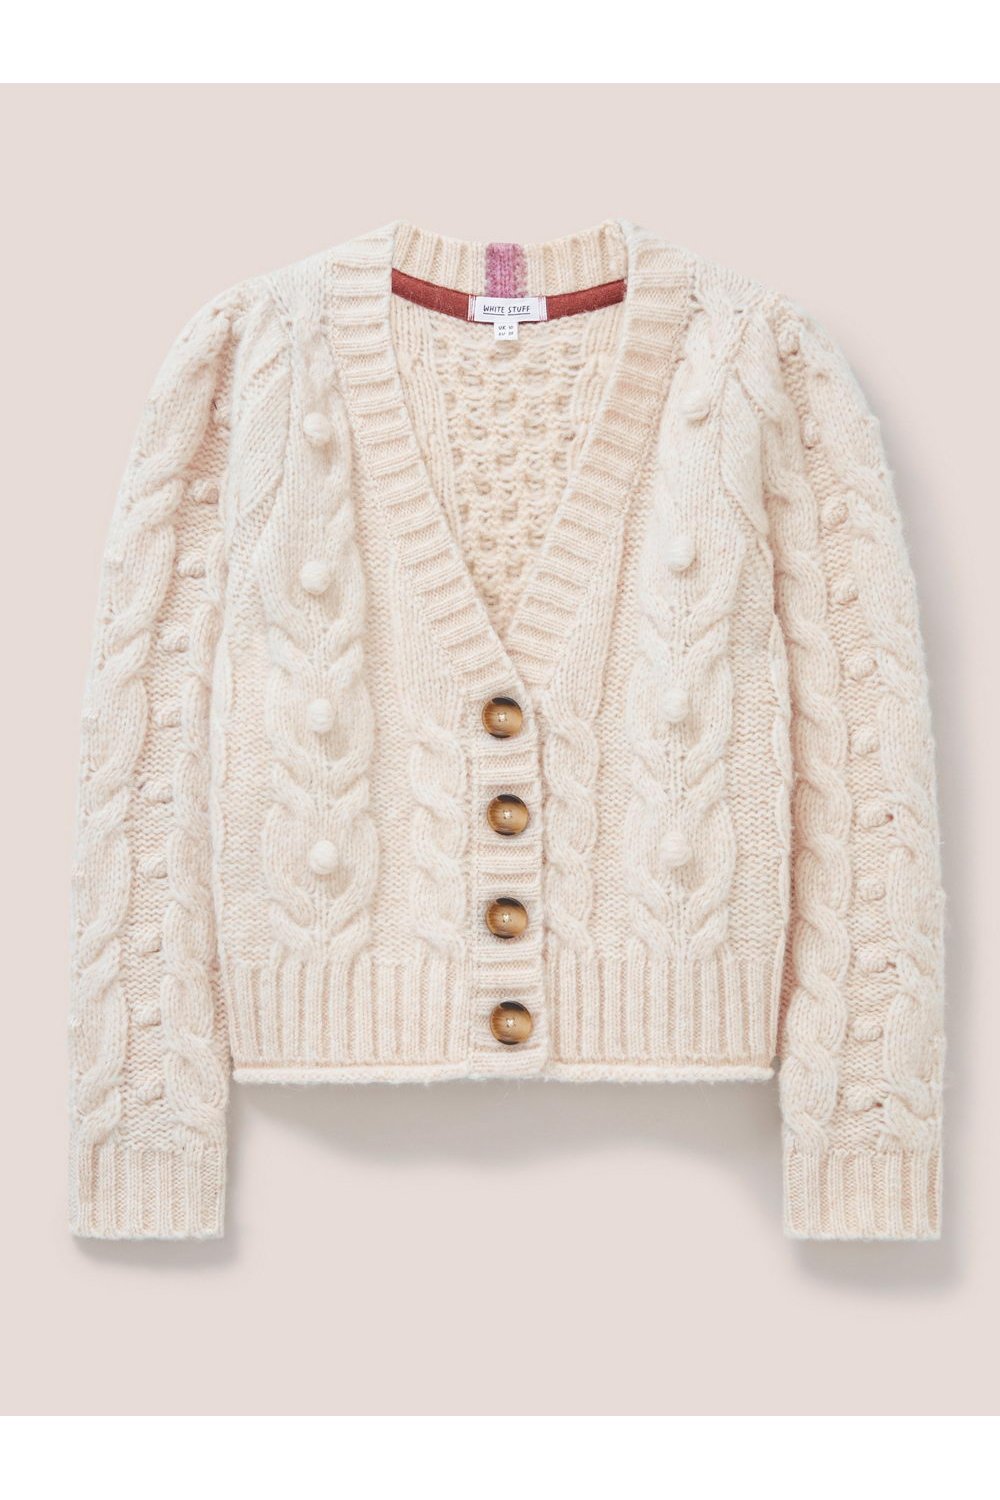 White Stuff CABLE CARDI in DK NAT